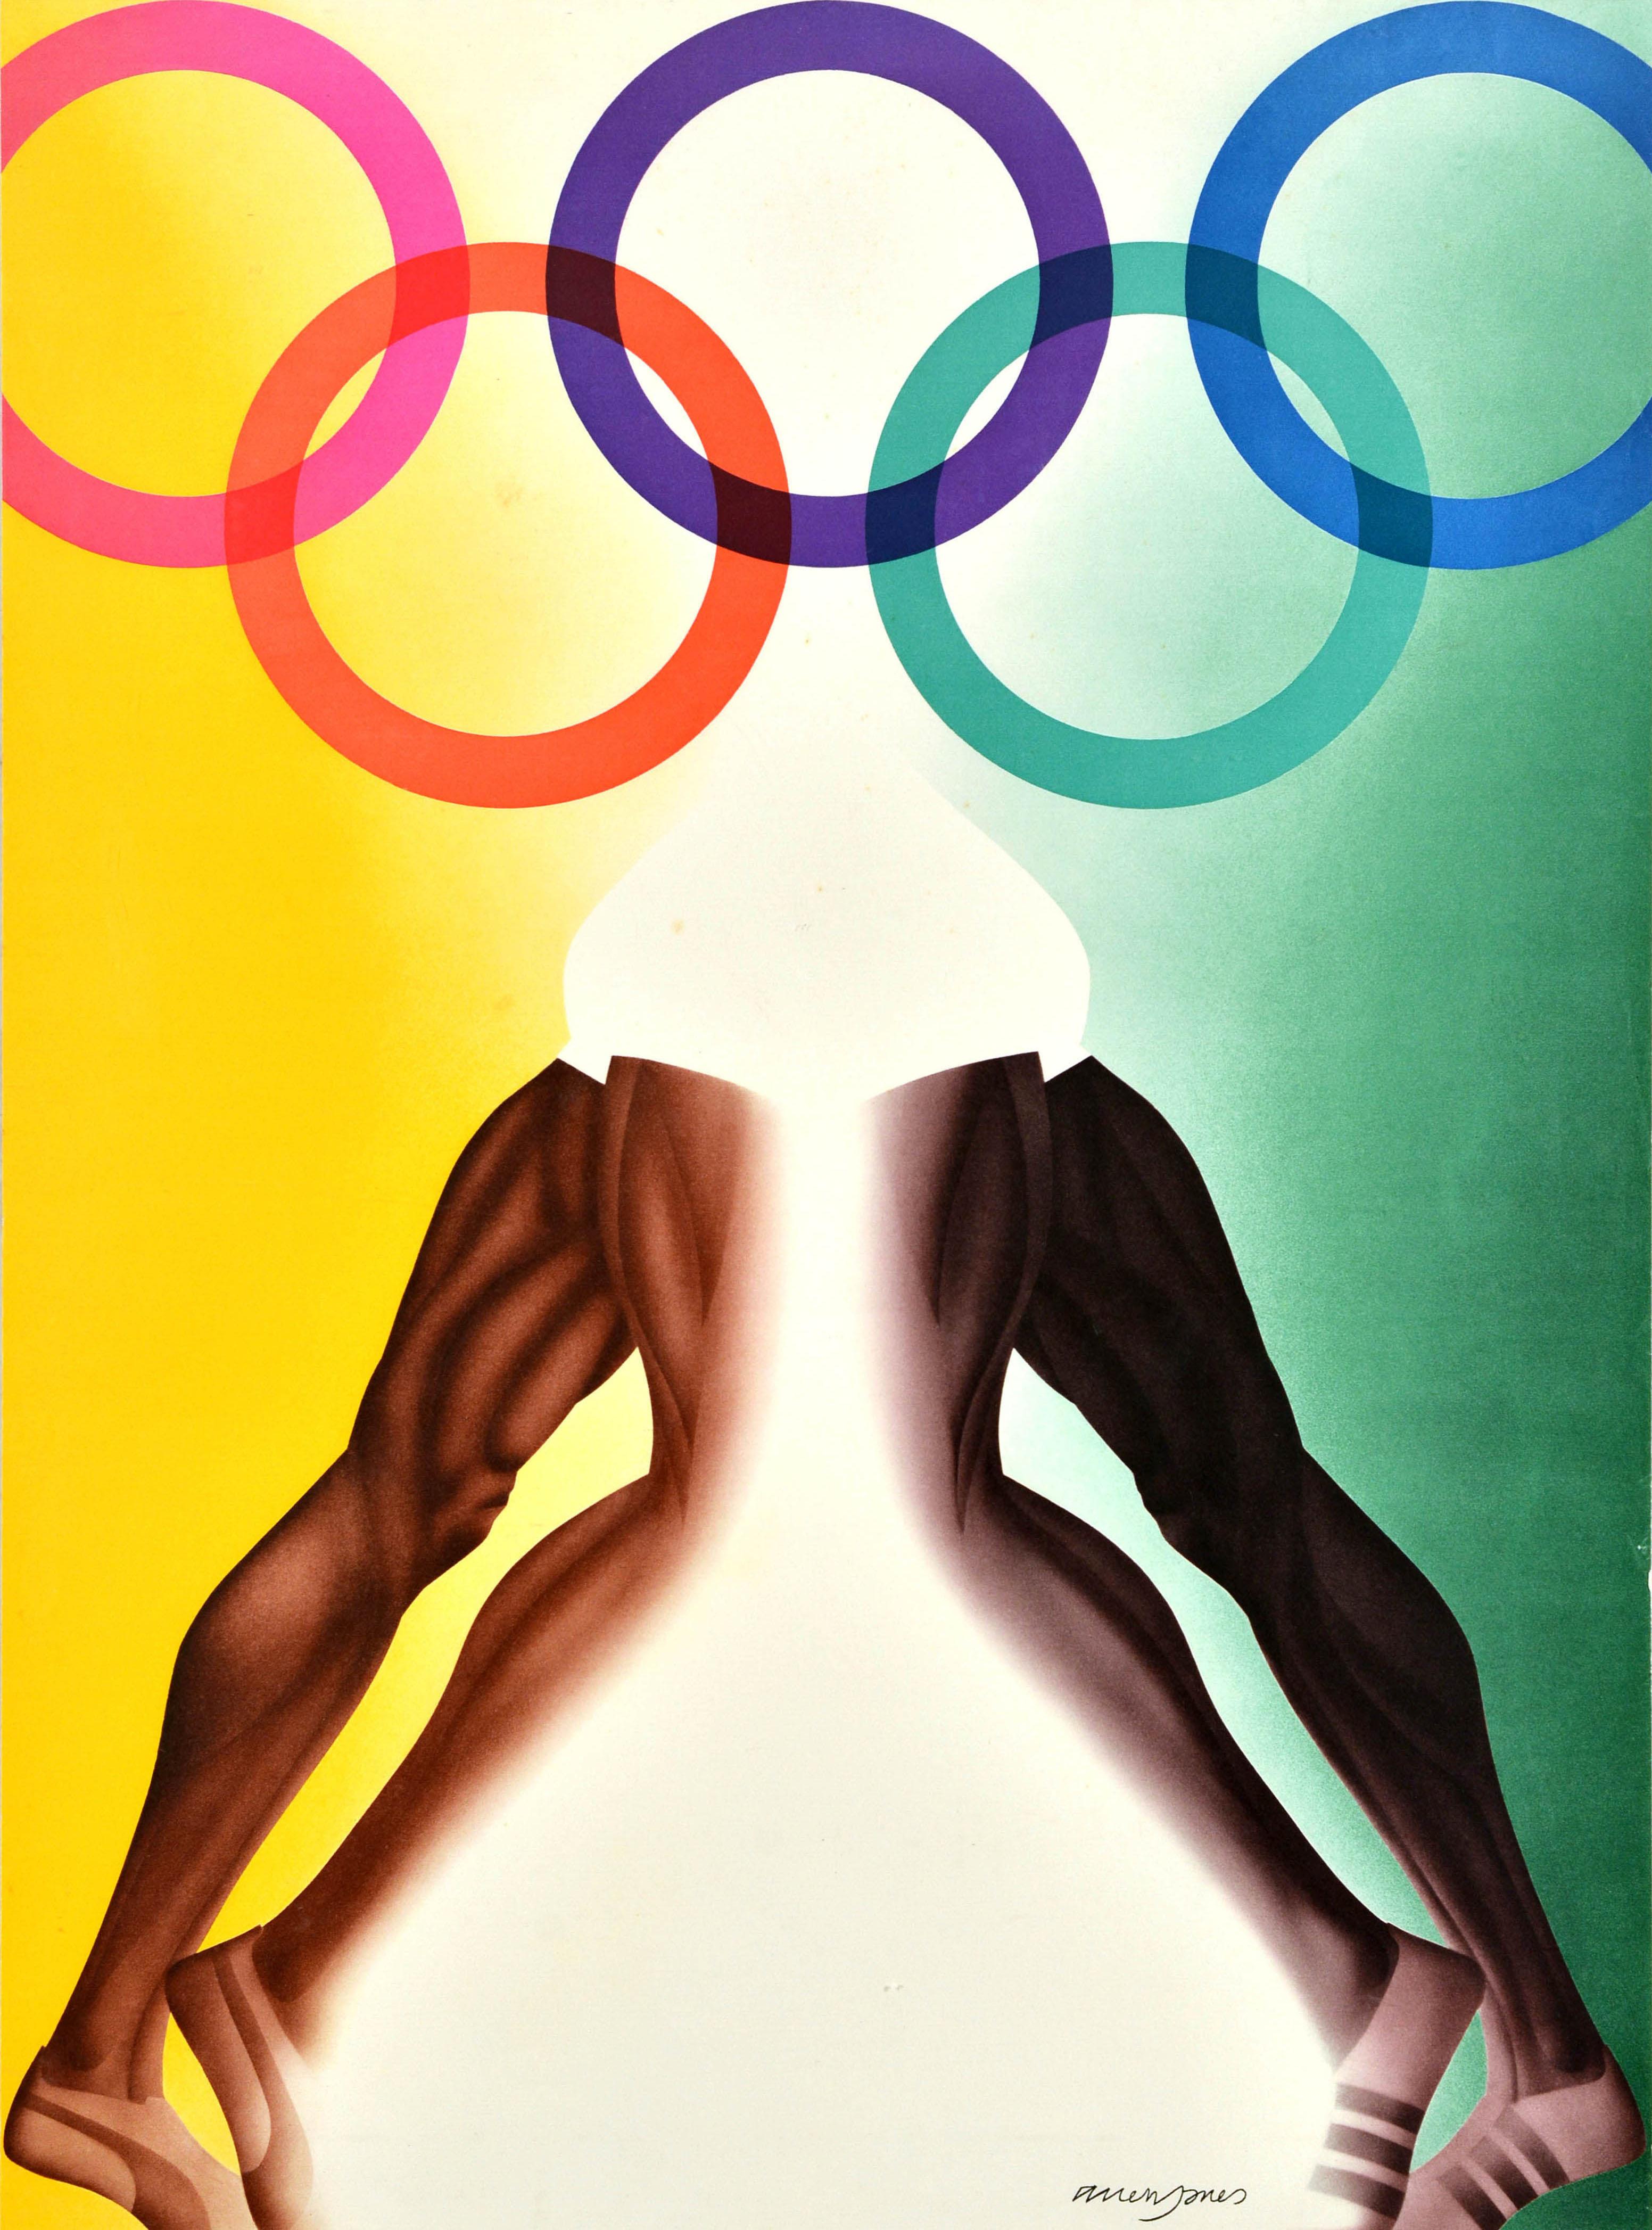 Original vintage sport poster for the 1972 Summer Olympic Games in Munich Germany featuring a colourful illustration by the British pop artist Allen Jones (b. 1937) depicting the logo with the five Olympic rings in pink, orange, purple, green and